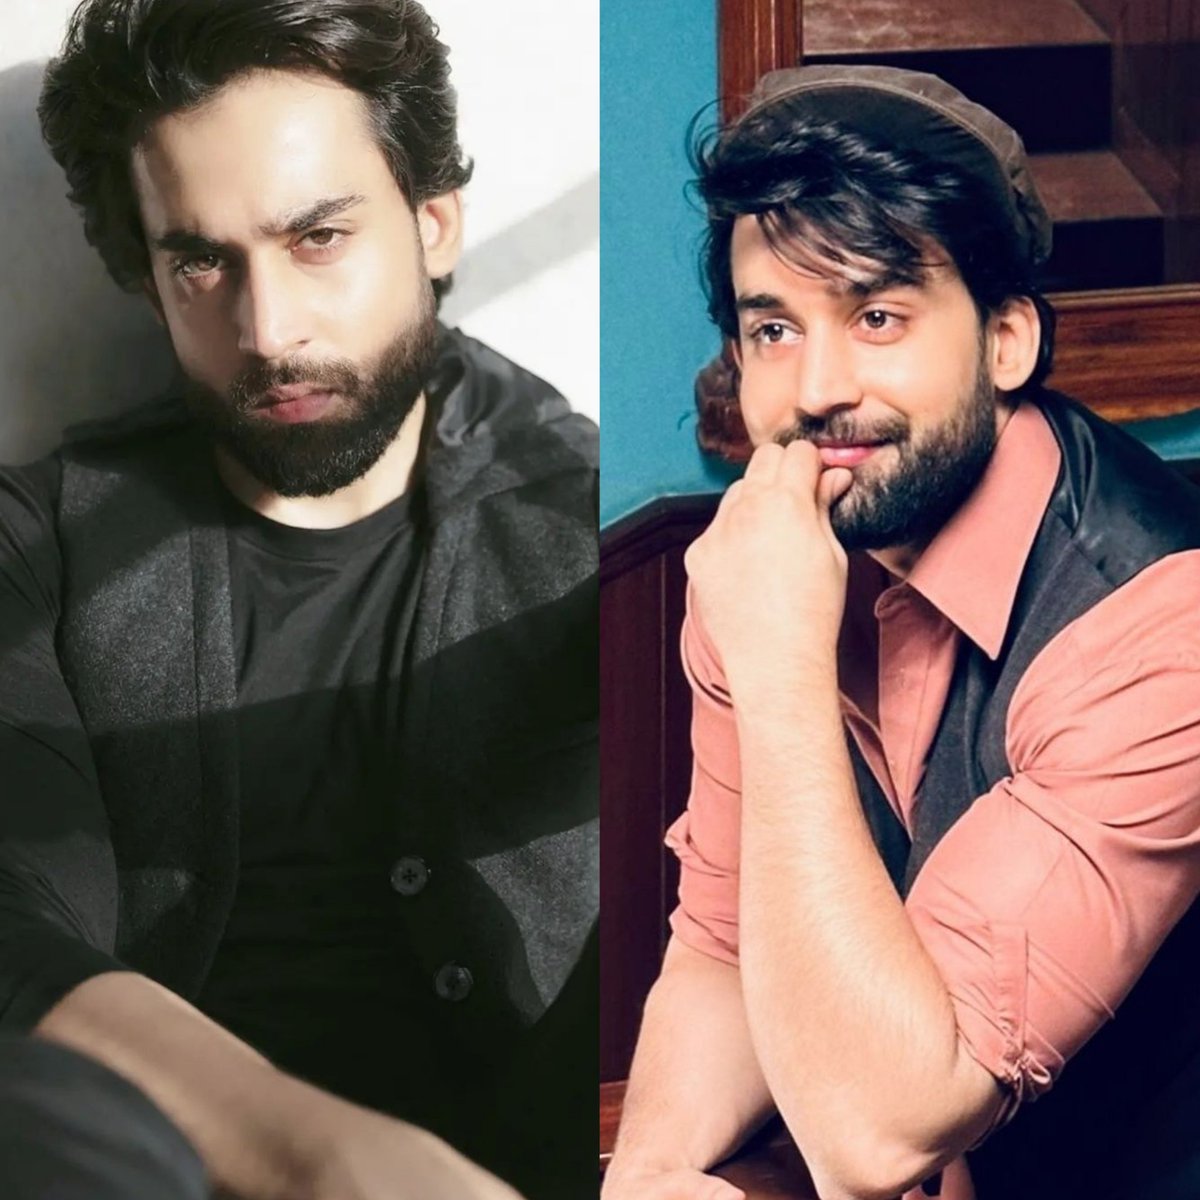 you mean it's the same person ?
Its crazy how he does it. Brilliant brilliant performer Mr Bilal Abbas Khan 👏 

#IshqMurshid #BilalAbbasKhan